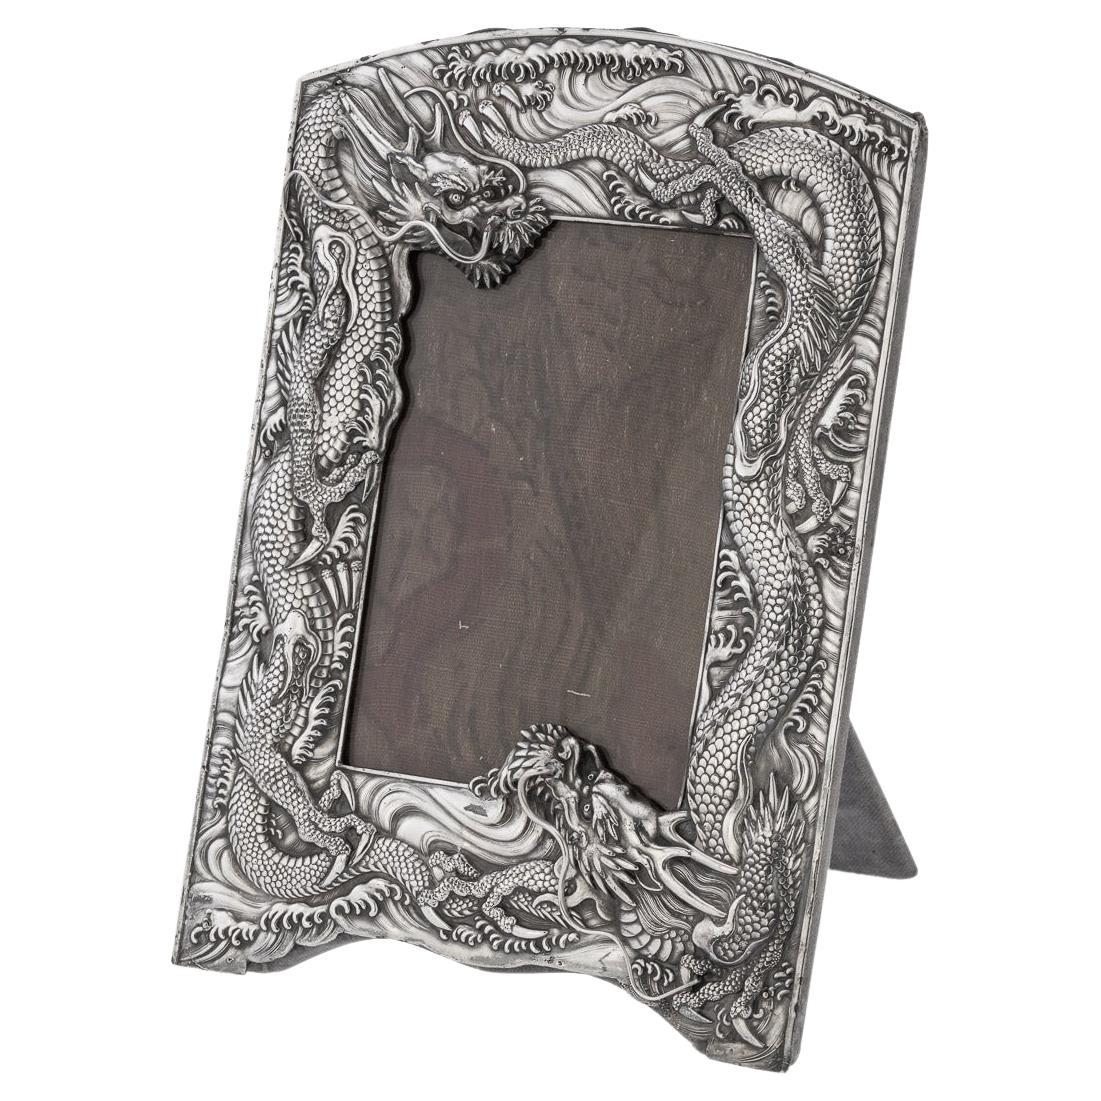 20th Century Japanese Meiji Period Solid Silver Dragon Photo Frame, c.1900